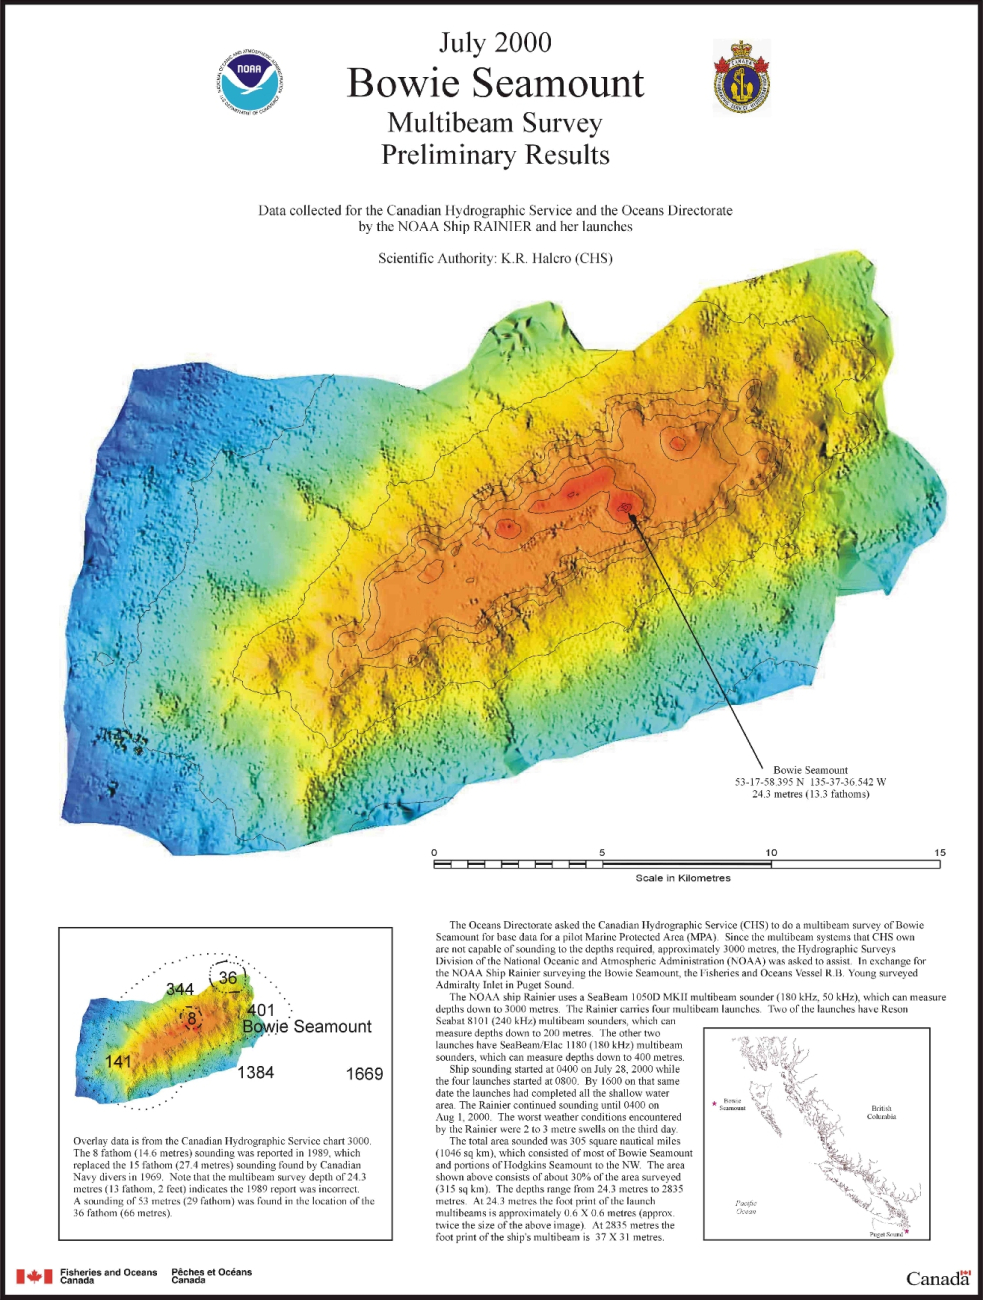 Multi-beam sounding map of Bowie Seamount in the NE Pacific Ocean off BritishColumbia